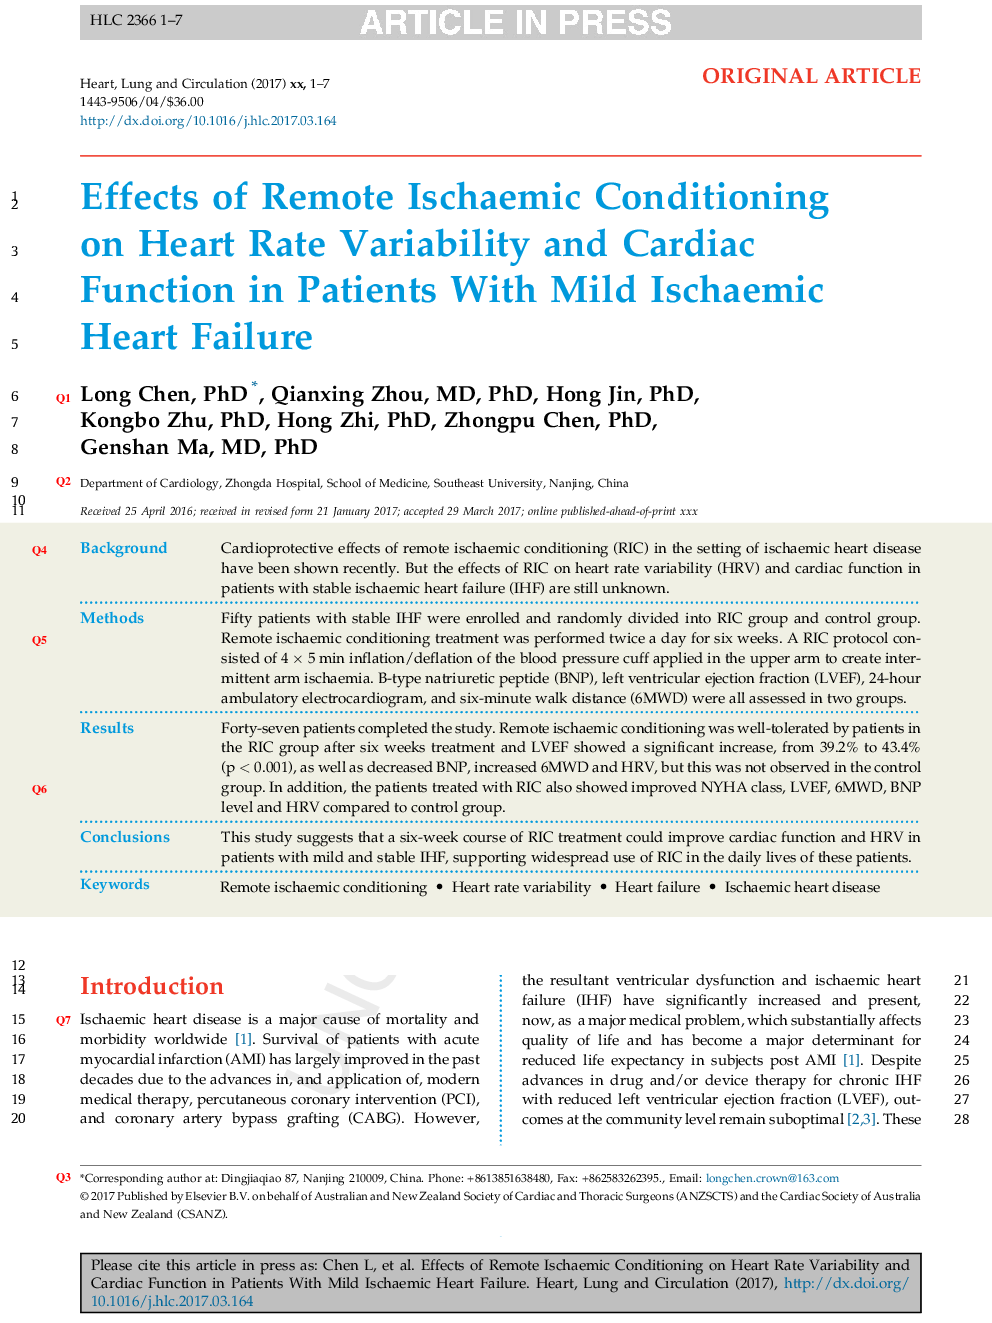 Effects of Remote Ischaemic Conditioning on Heart Rate Variability and Cardiac Function in Patients With Mild Ischaemic Heart Failure